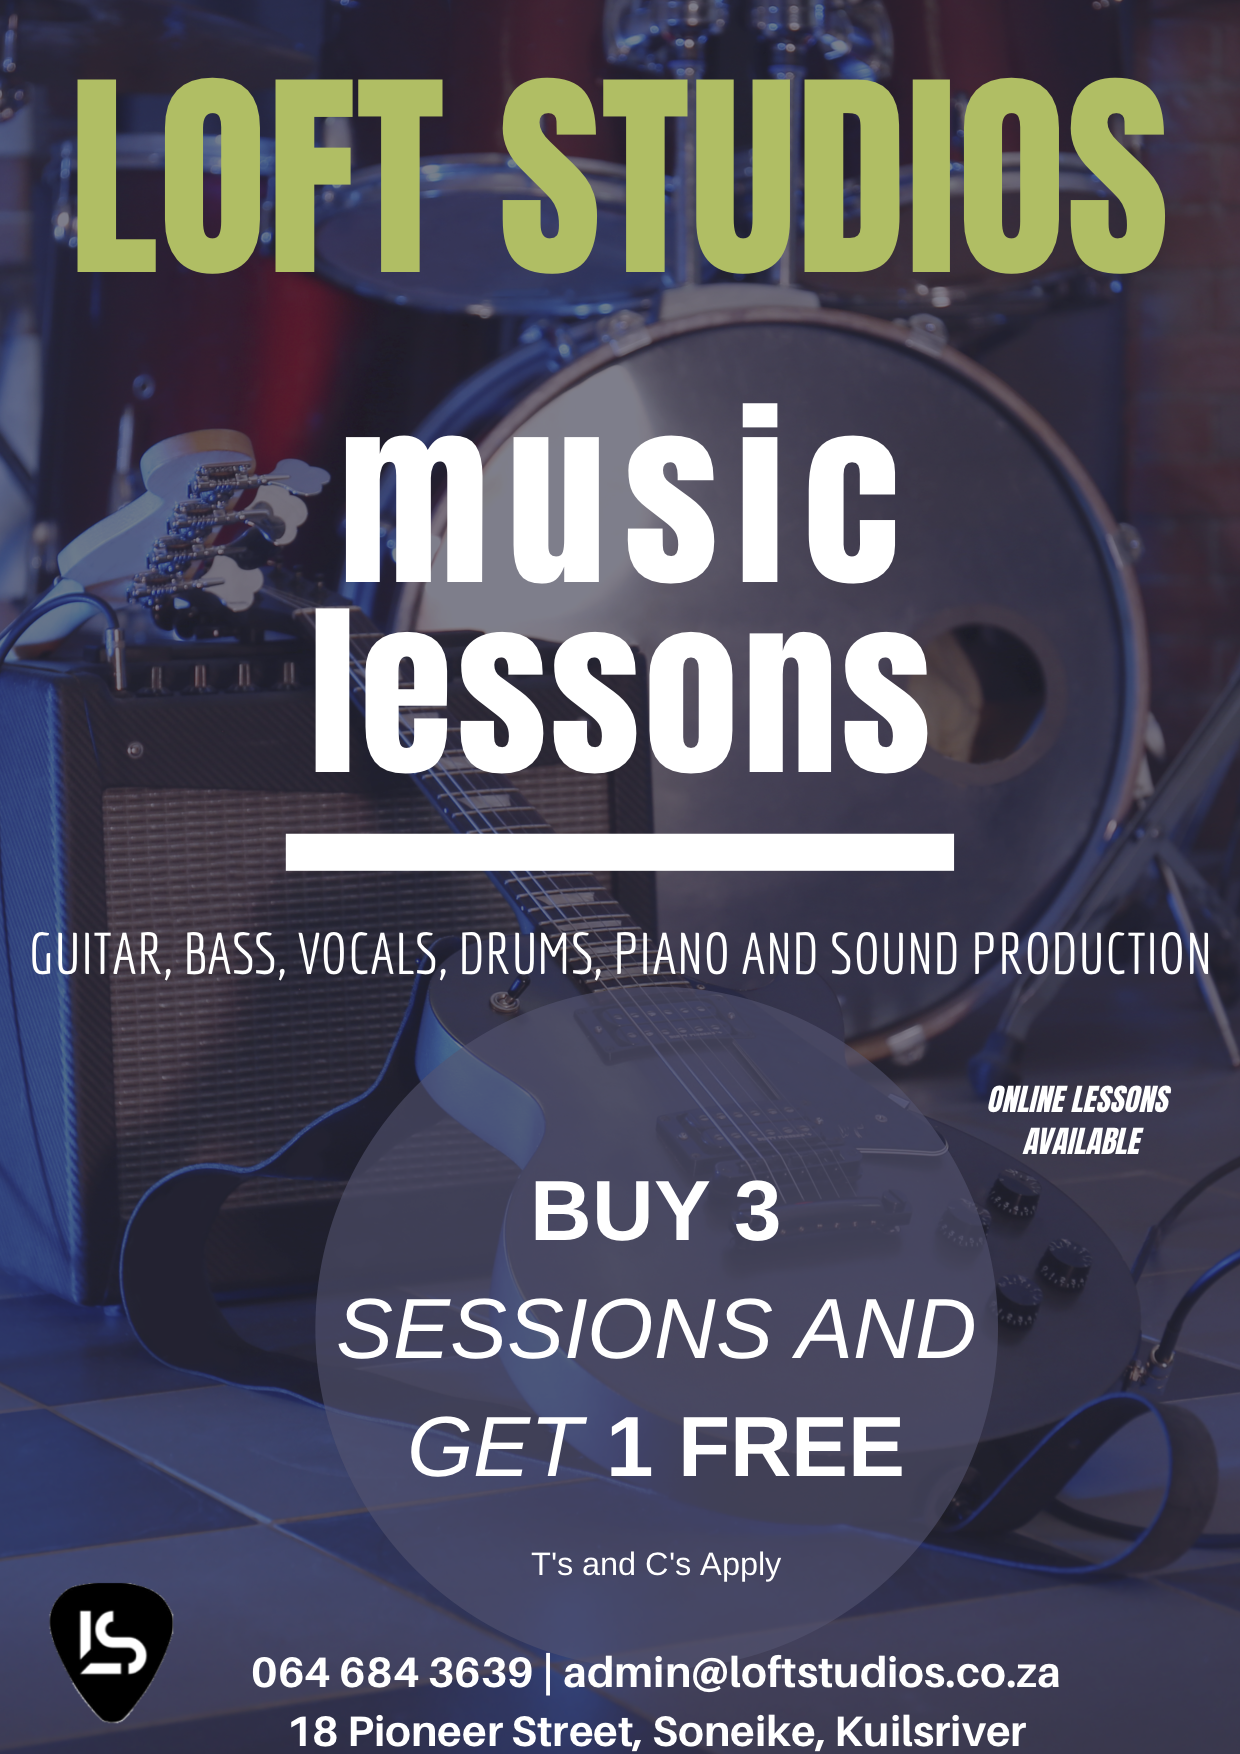 Professional music lessons